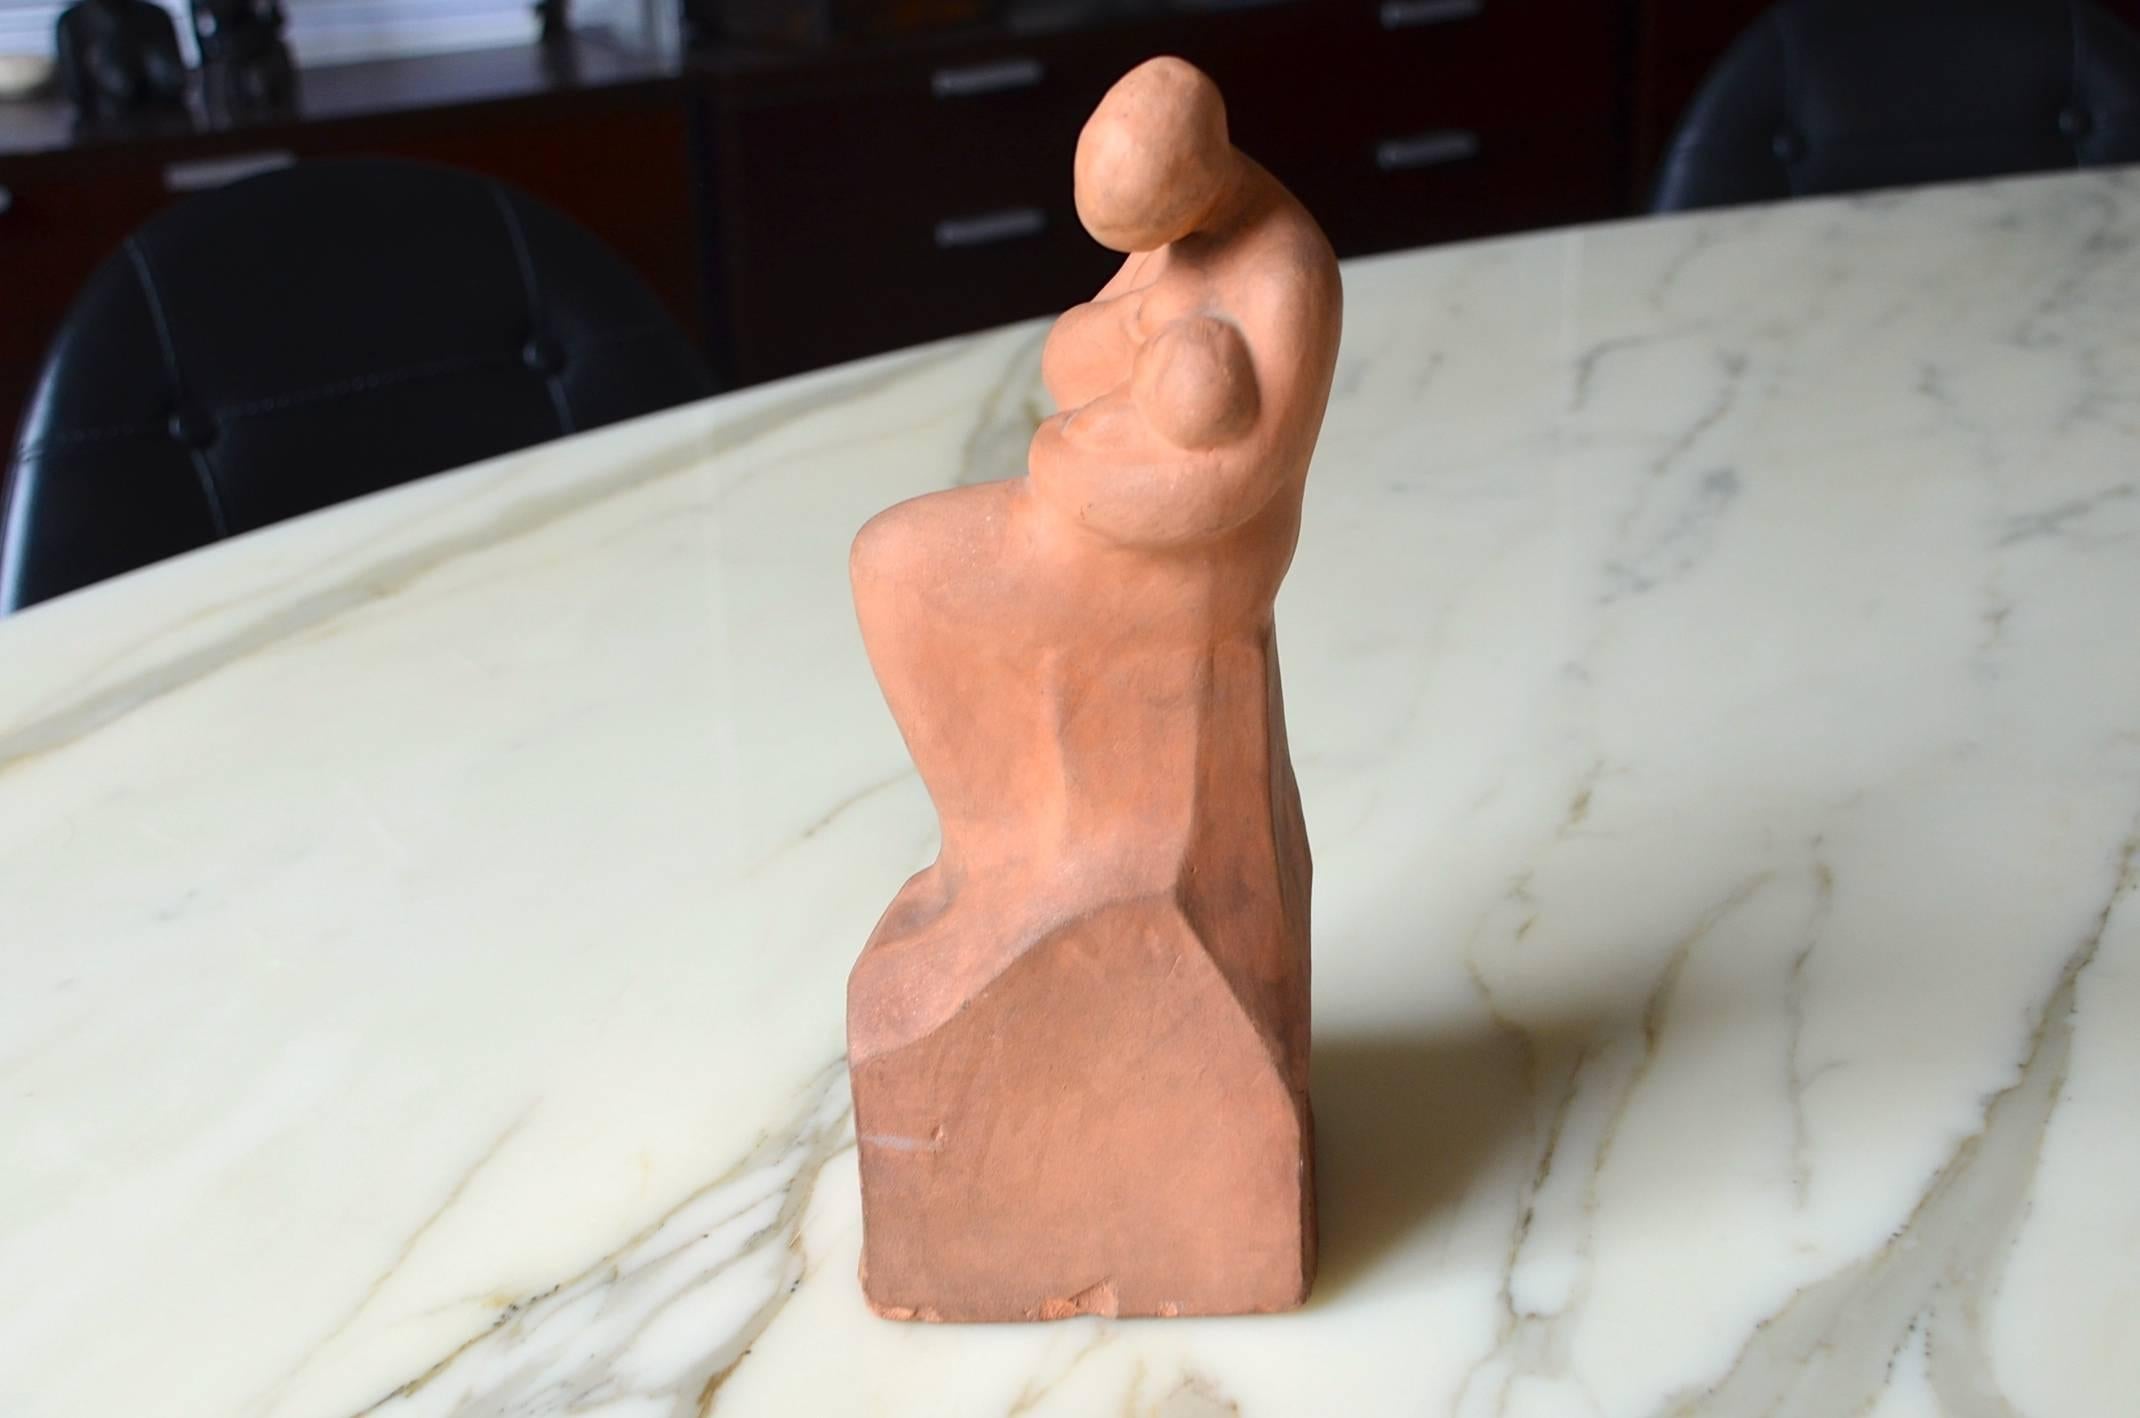 Wonderful Art Deco maternity sculpture of mother breast feeding her infant by Swiss sculptor Huguenin Dumittan (1888-1975).

Signed on the base and dated 1917. 

Very good conditions, small minor chips on the edge of the base (see photos).